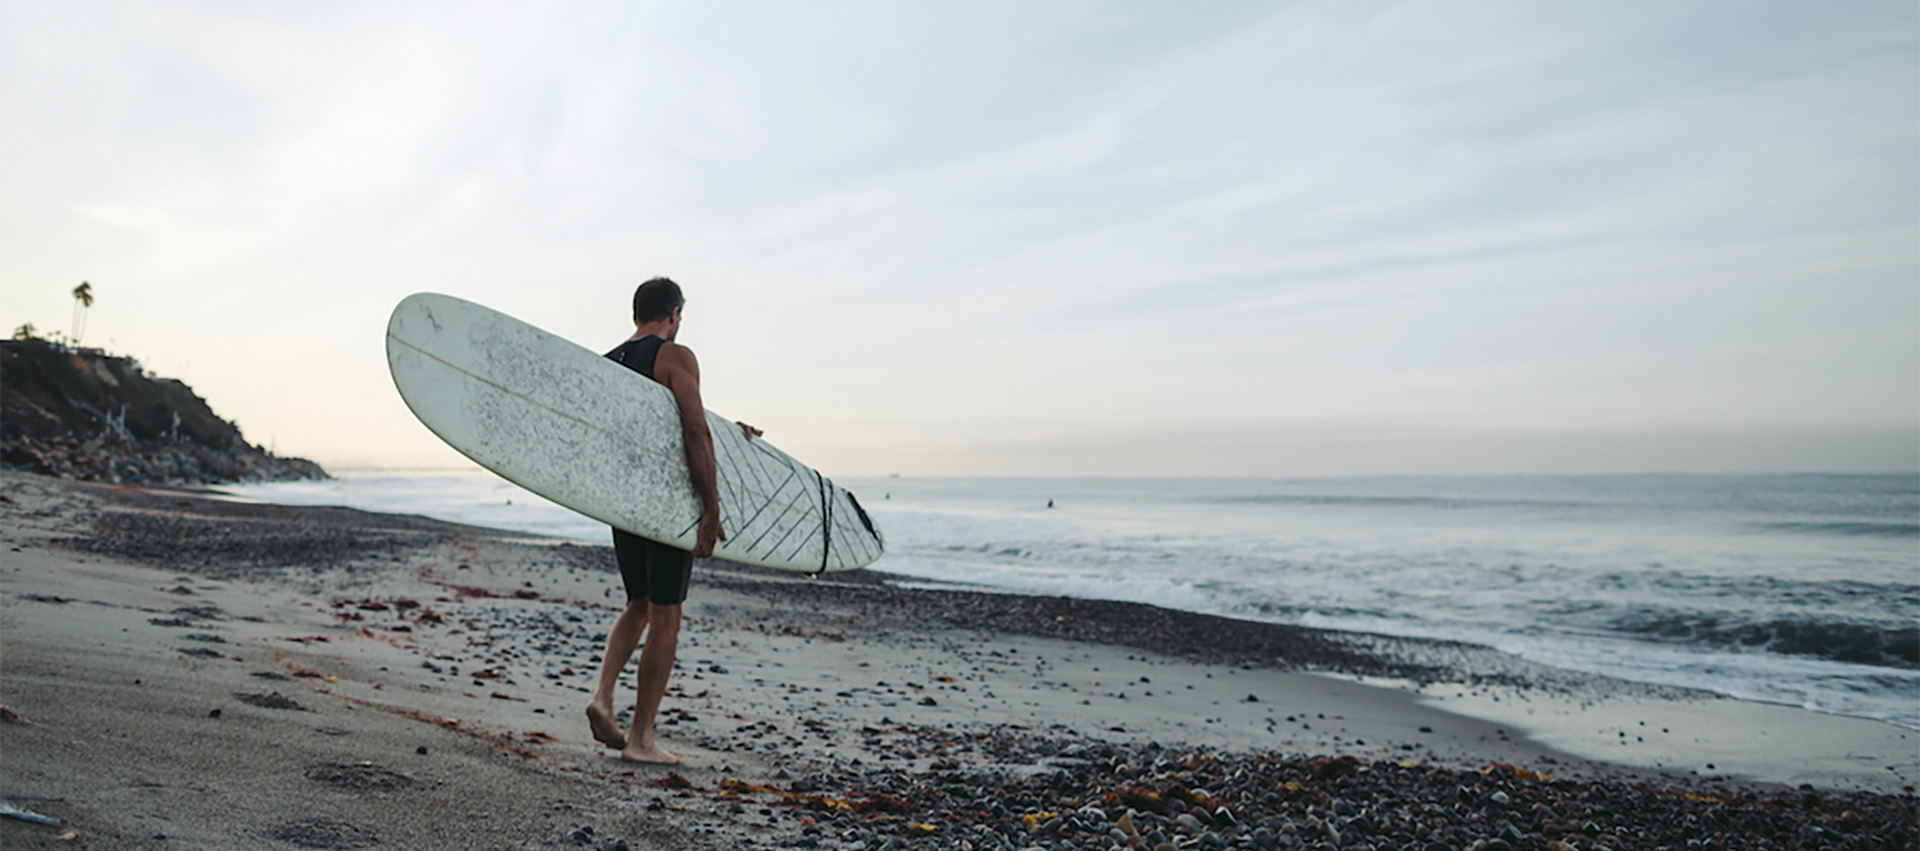 Image of a surfer standing on the beach